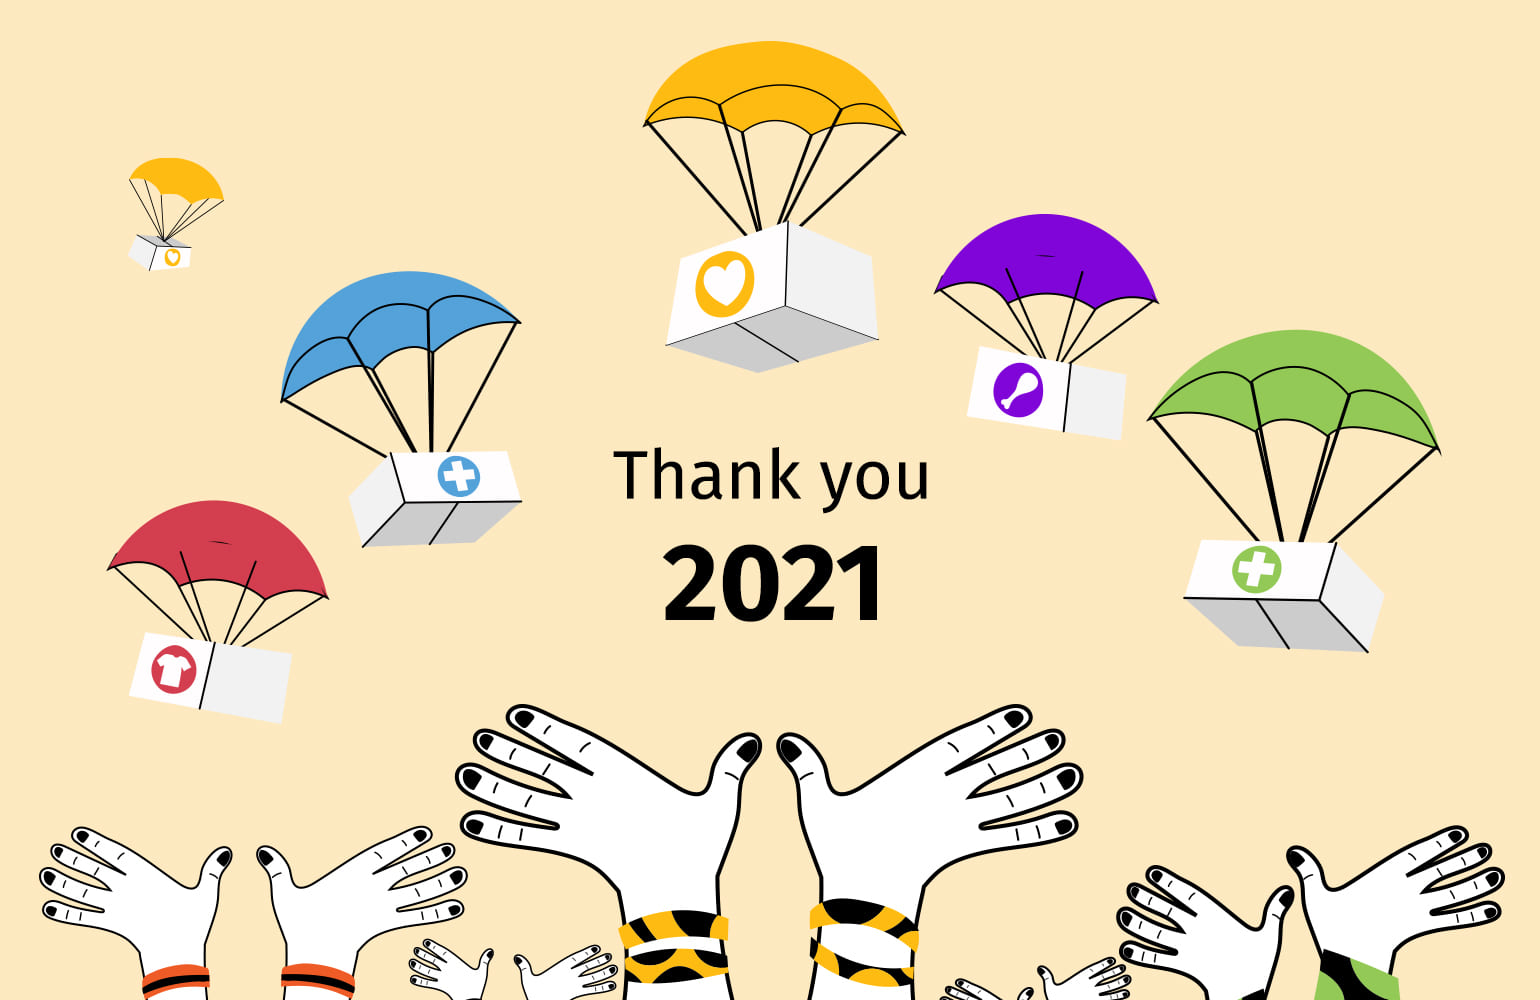 Thank you 2021 – time to give back